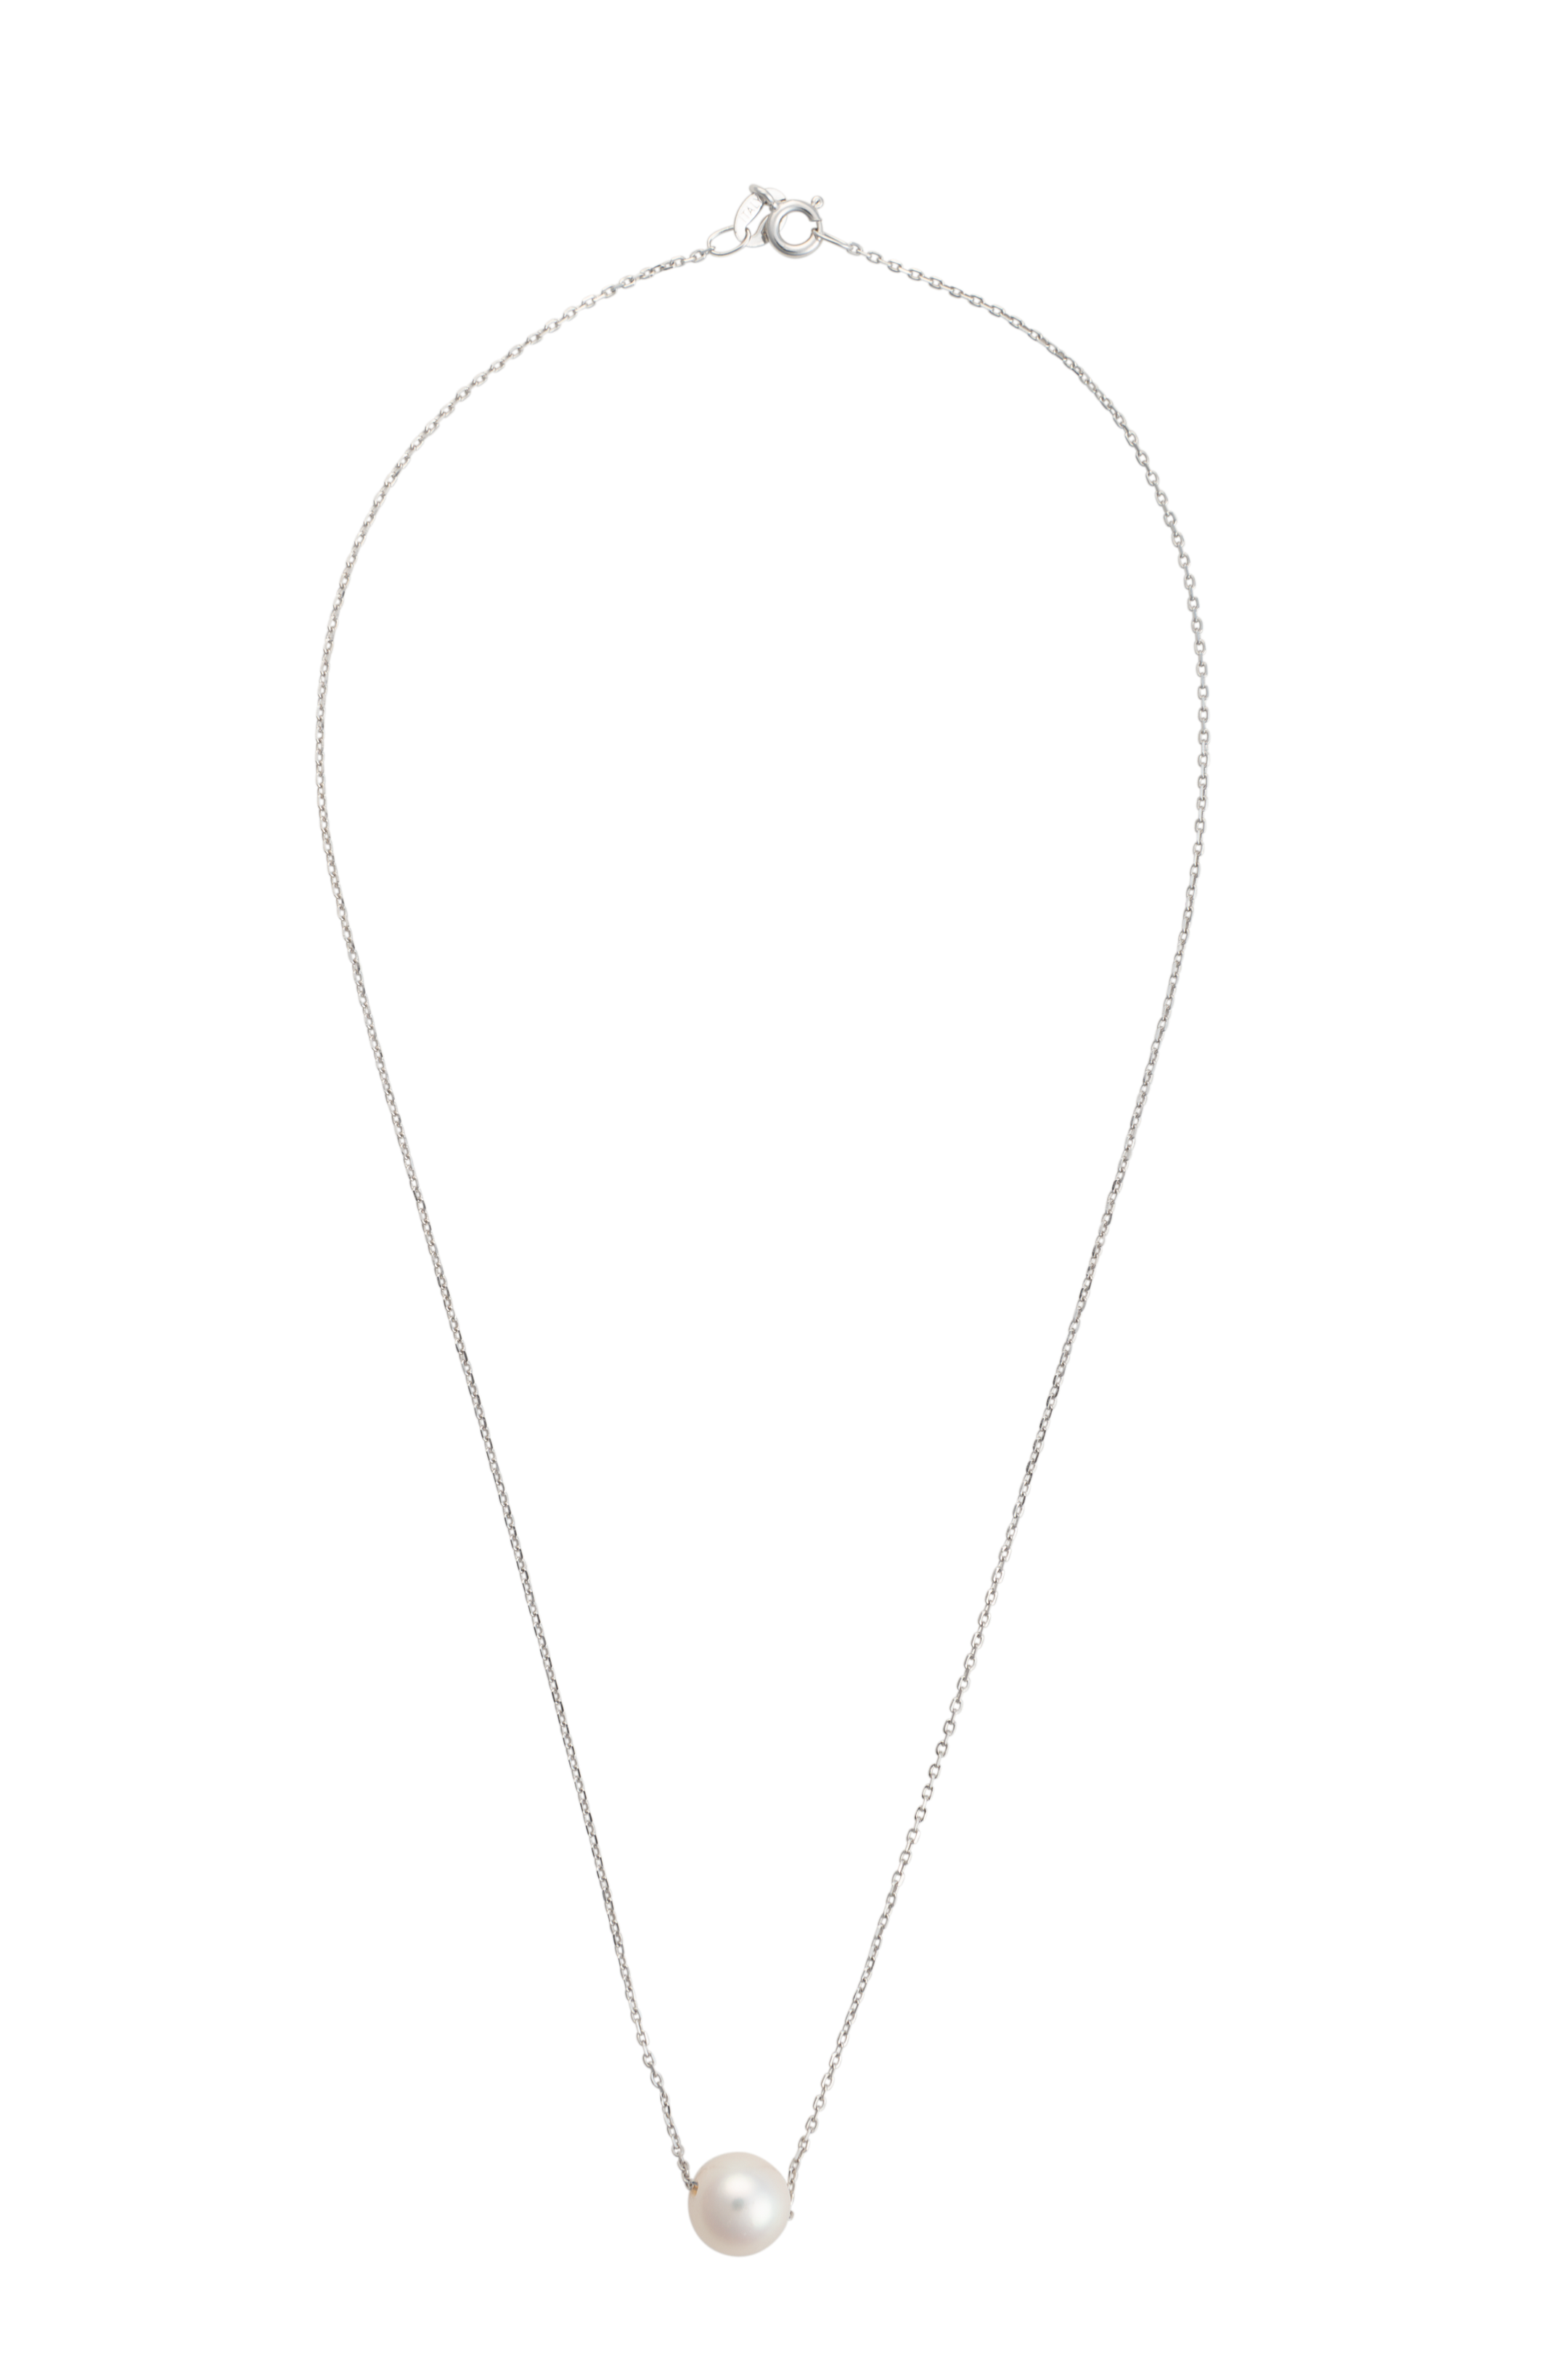 Signature Floating Pearl Necklace | Dog House Pearls